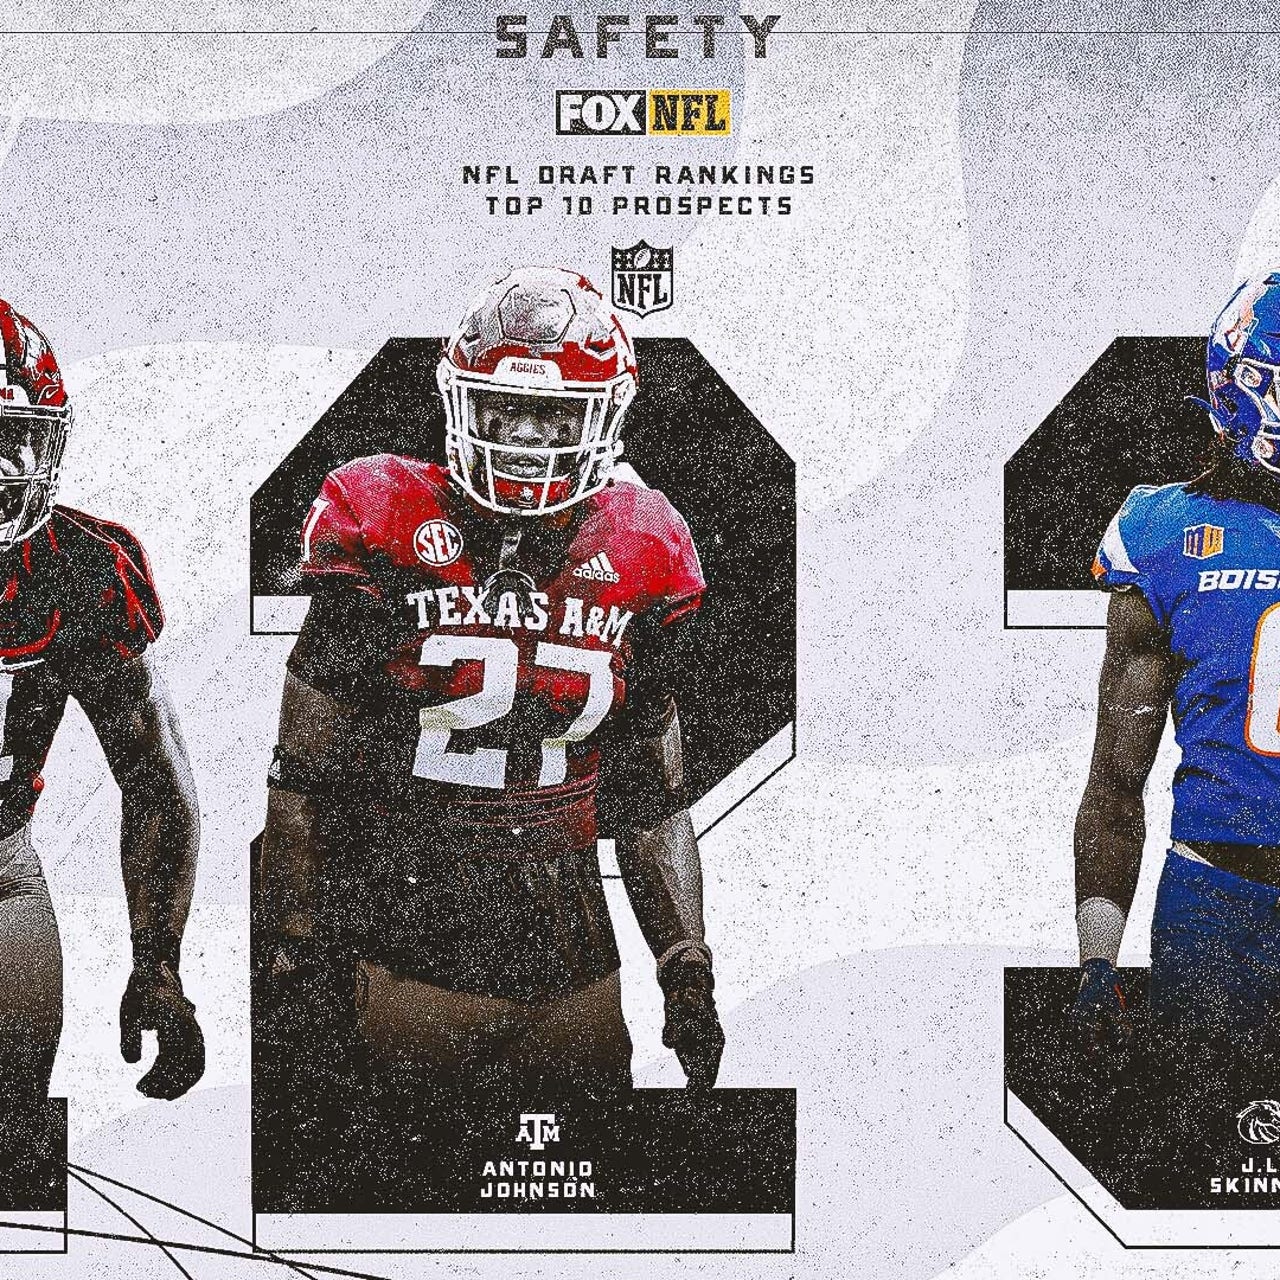 2023 NFL Draft safety rankings, scouting reports Brian Branch the clear standout FOX Sports